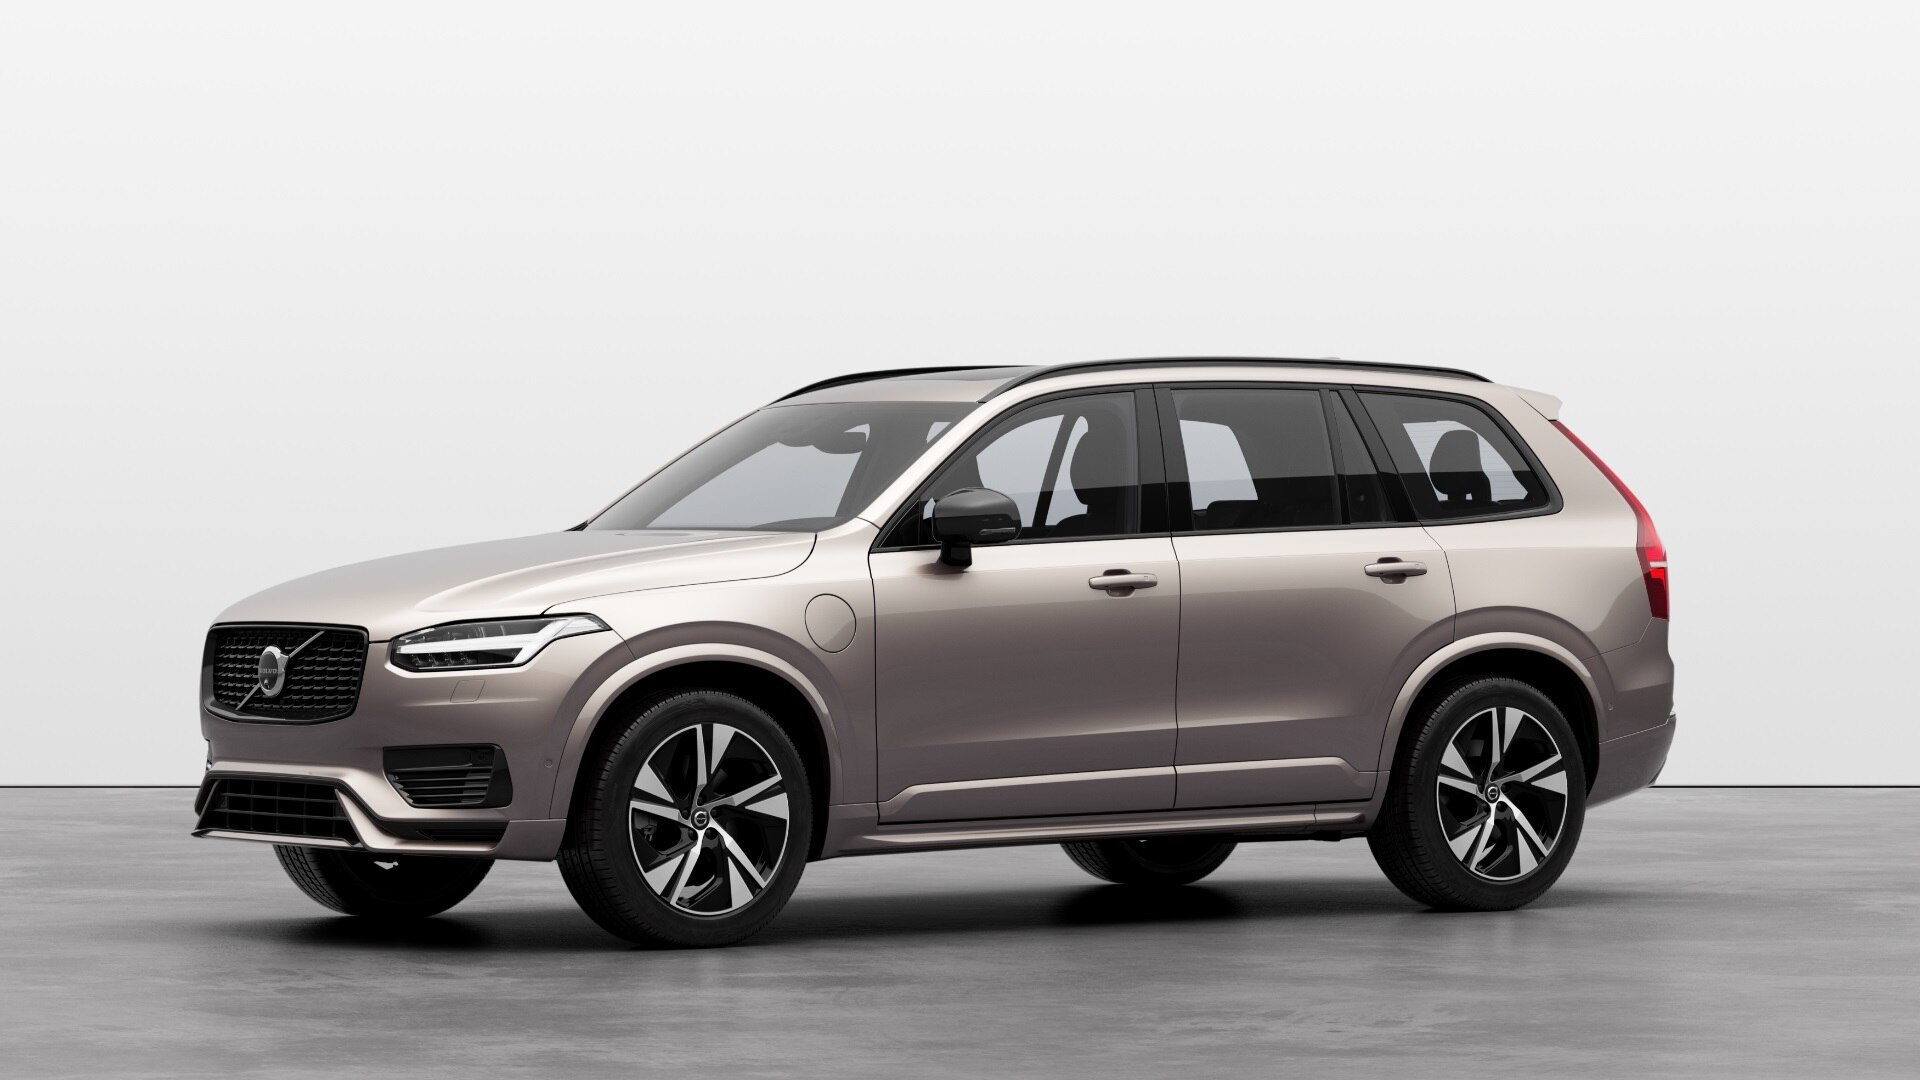 Volvo XC90 Recharge 2.0 T8 [455] RC PHEV Plus Dark 5dr AWD Geartronic Image 1